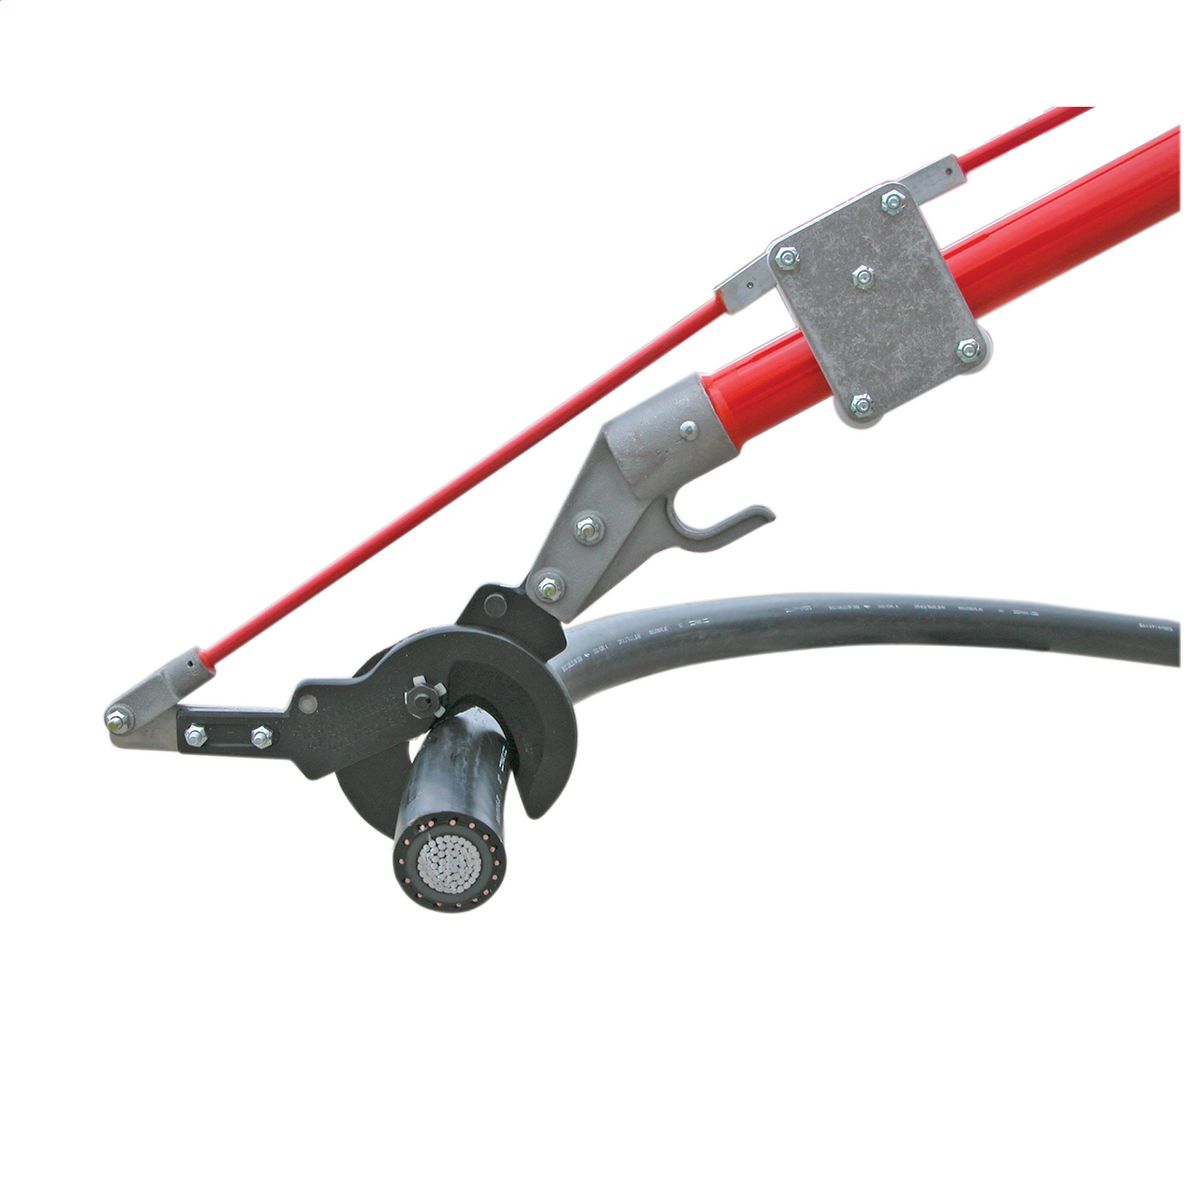 Stanley Ratchet Cable Cutter 84-862-22